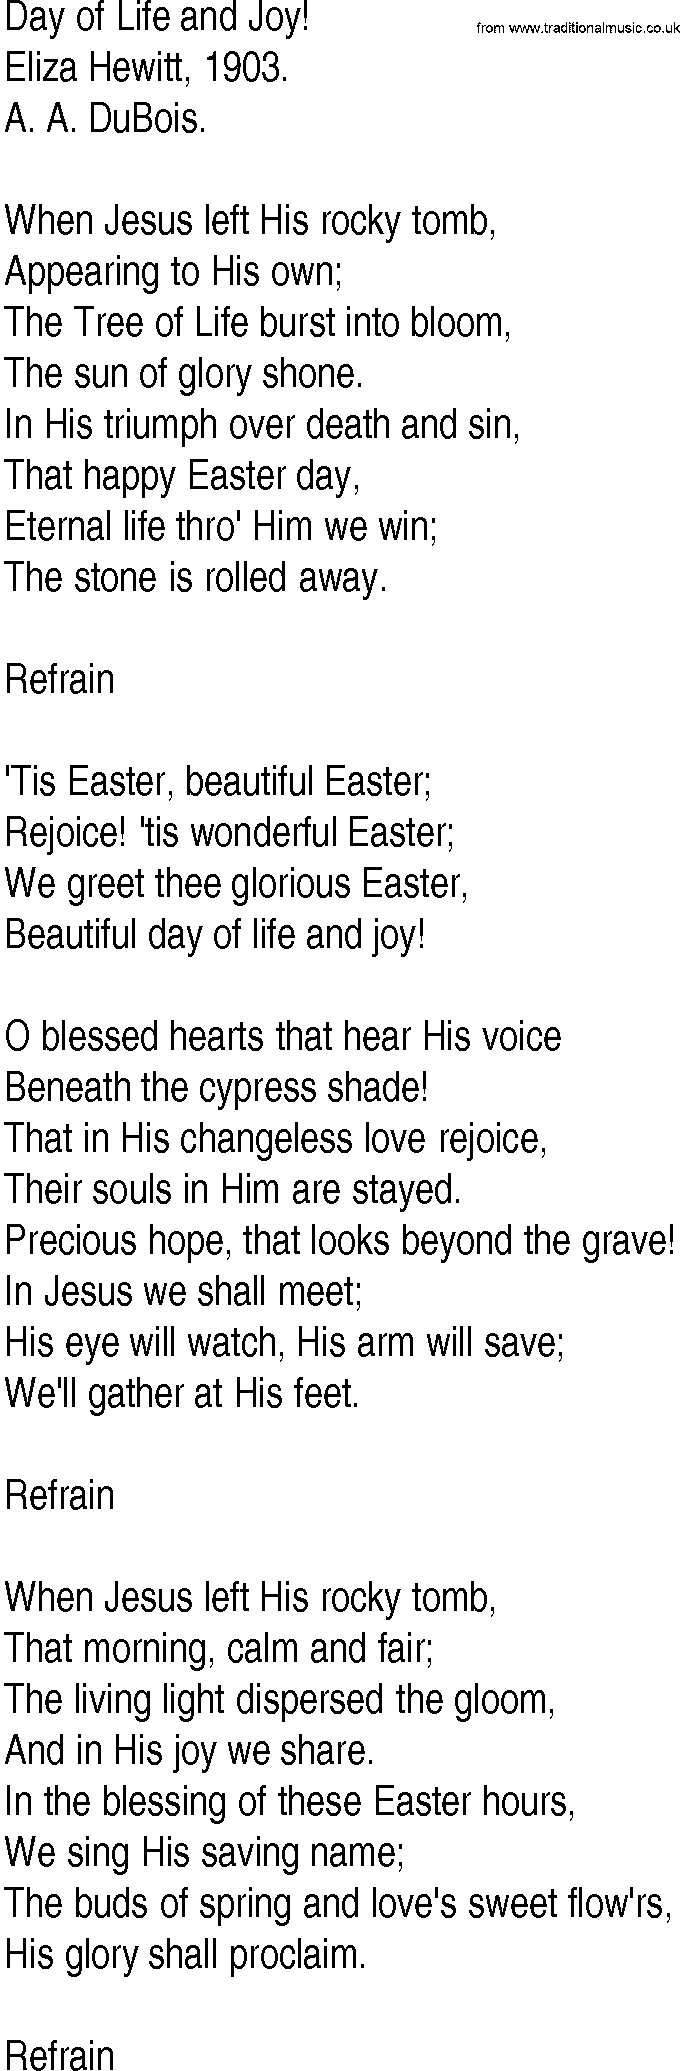 Hymn and Gospel Song: Day of Life and Joy! by Eliza Hewitt lyrics